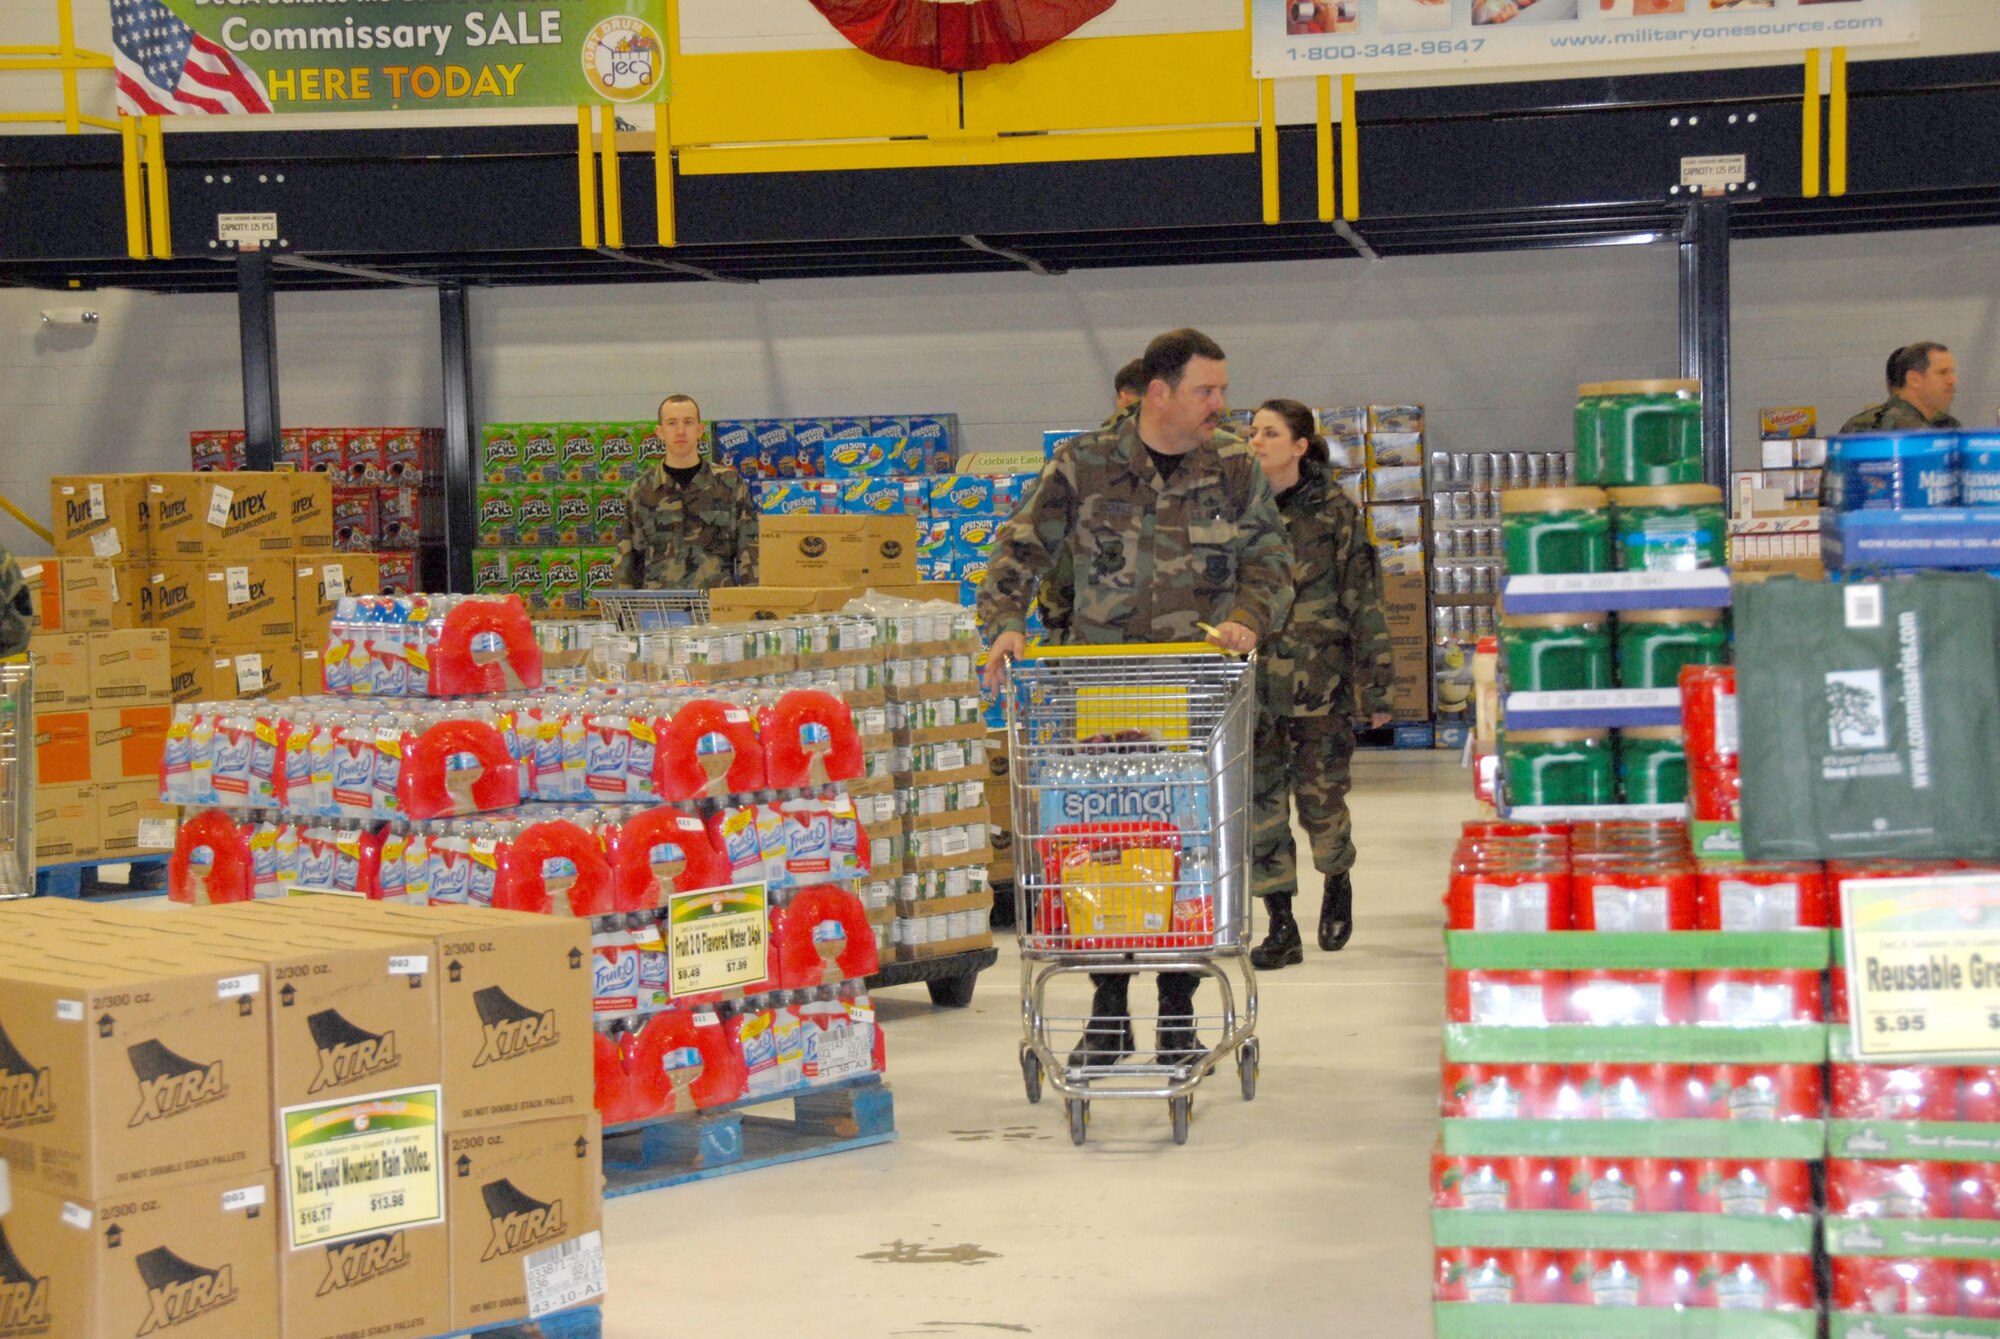 Airmen of the 107th Air Refueling Wing shop at the commissary that was brought to the Niagara Falls Air Reserve Station on March 8 and 9 by the Defense Commissary Agency.  